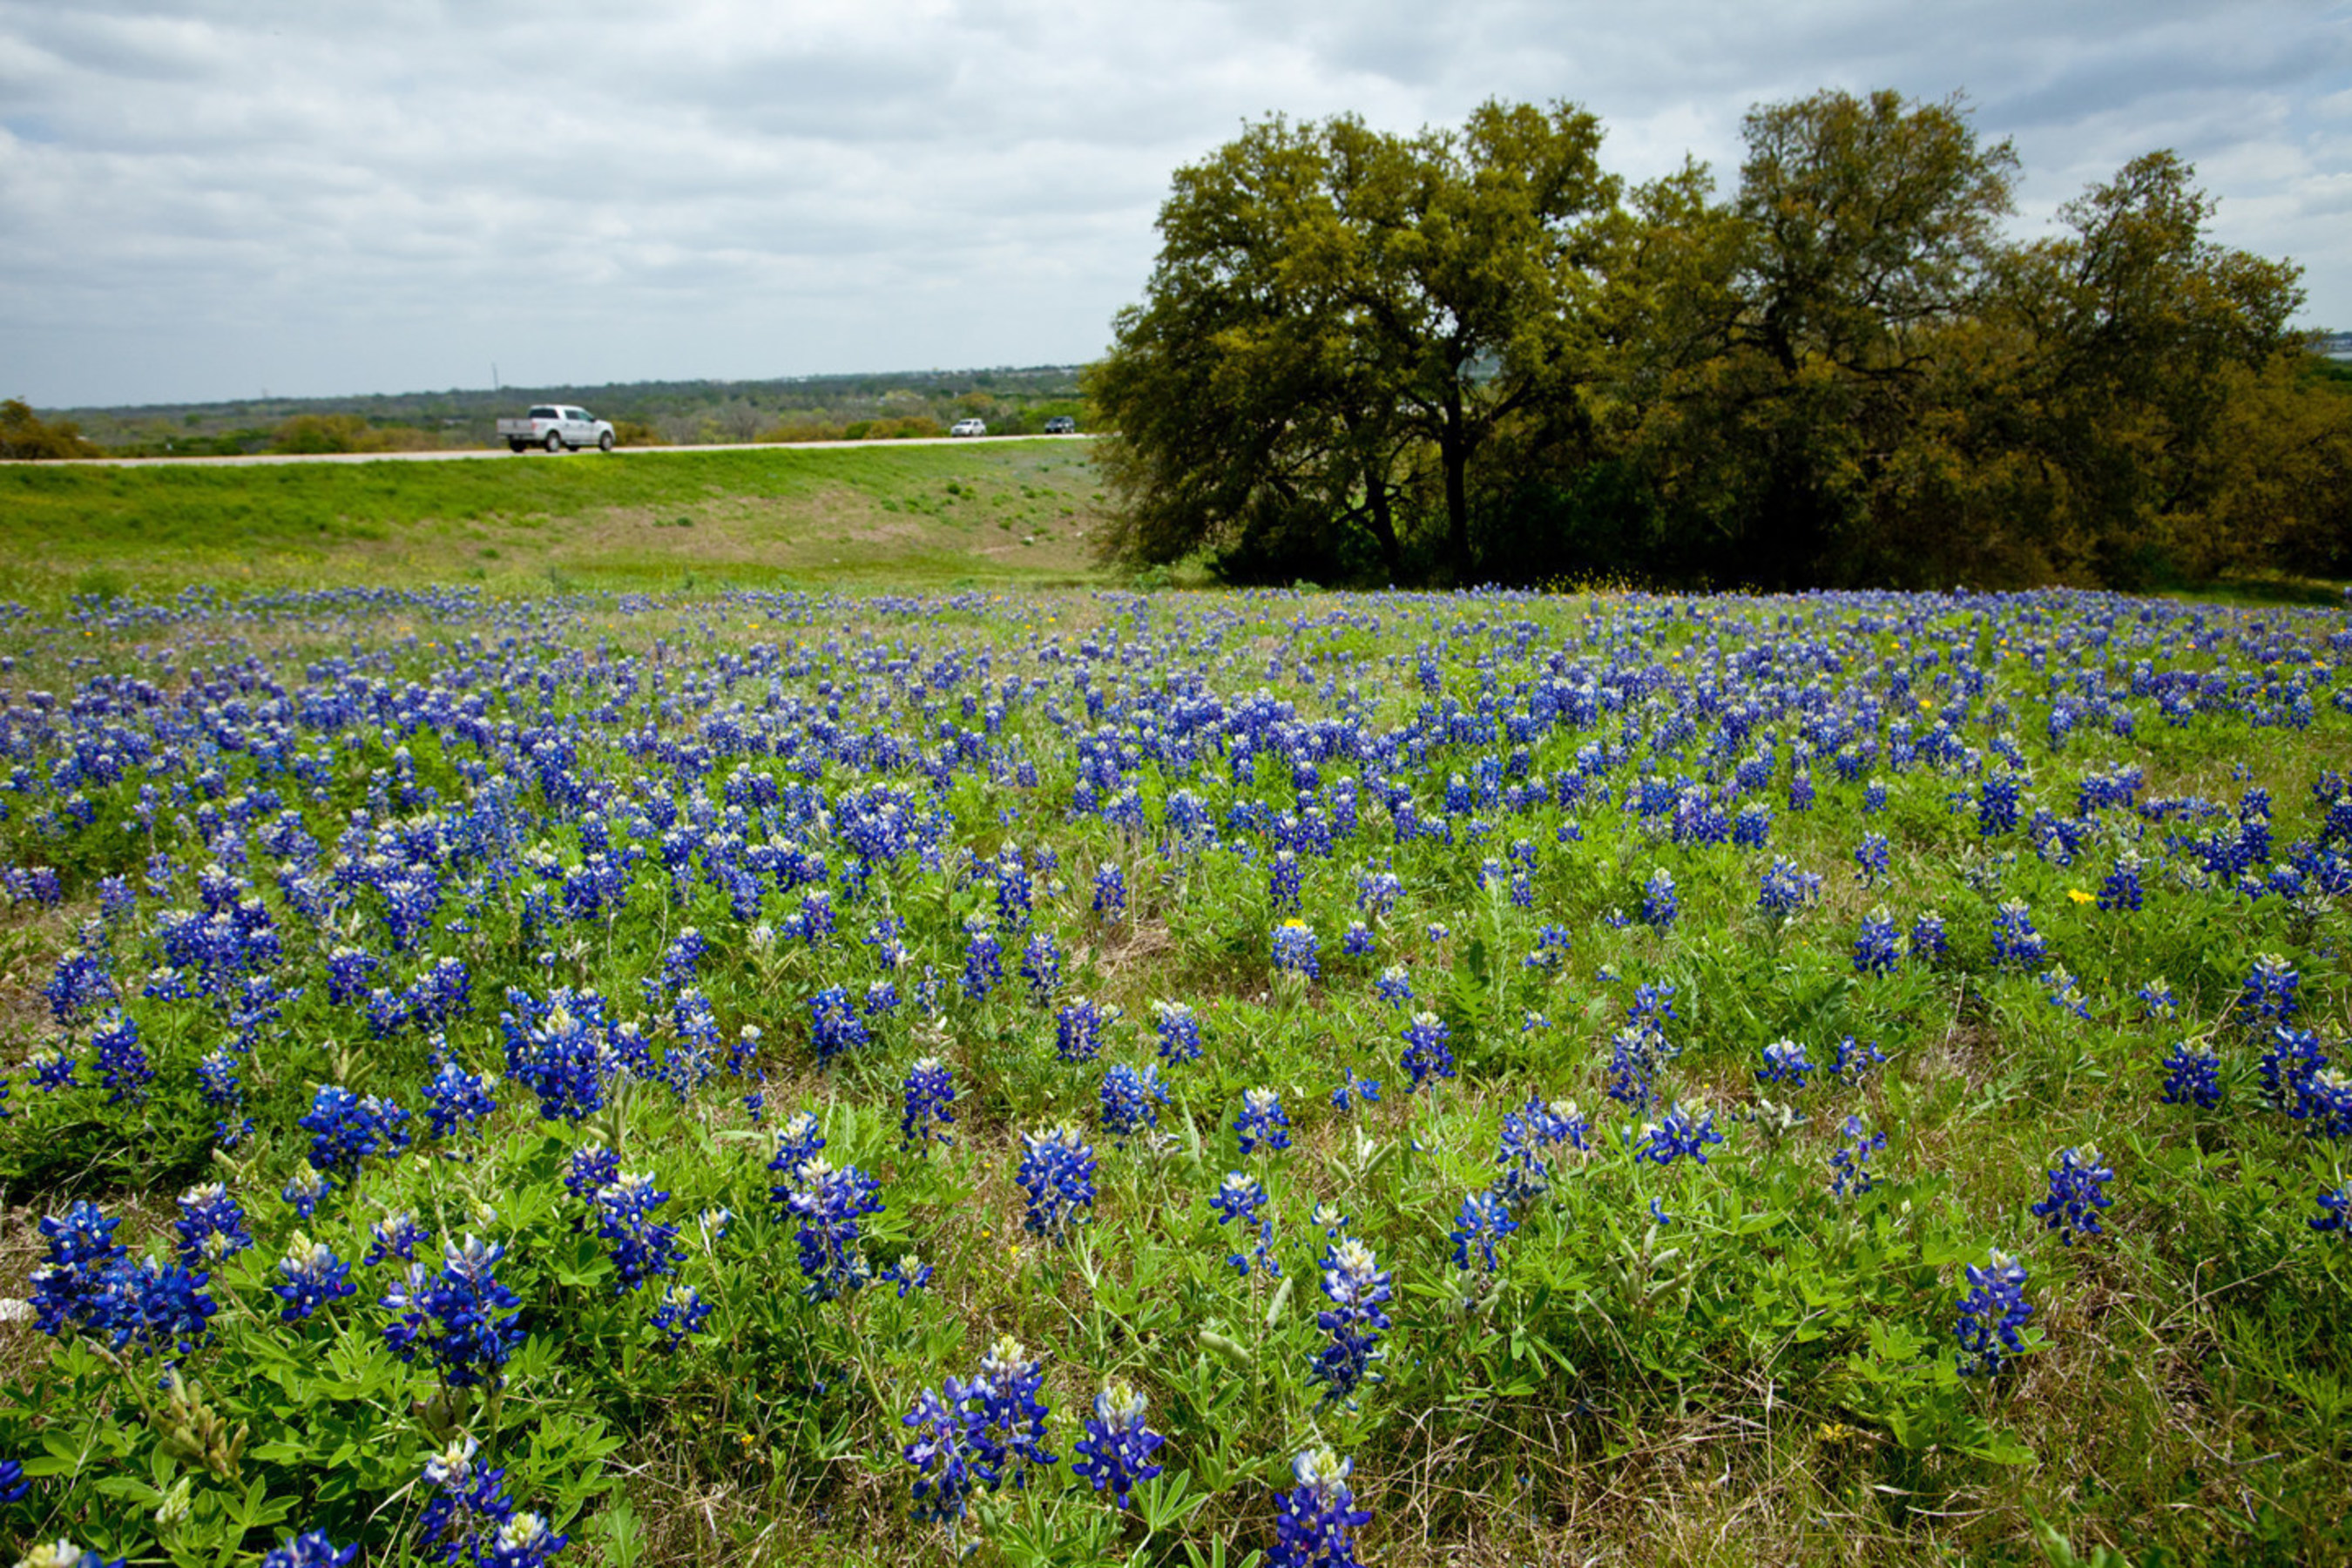 Bluebonnets herald spring in the Texas Hill Country. New Braunfels, Texas, the vacation destination for generations of Texans, offers a perfect BFF or "love of your life" getaway April-May - warm enough to enjoy water recreation in two beautiful rivers, the world's best water park and a great lake. The perfect time for a tour of the Texas Hill Country wineries or a craft beer tour through the spectacular vistas of wildflowers and migrating birds. Live music throughout with dance halls and...